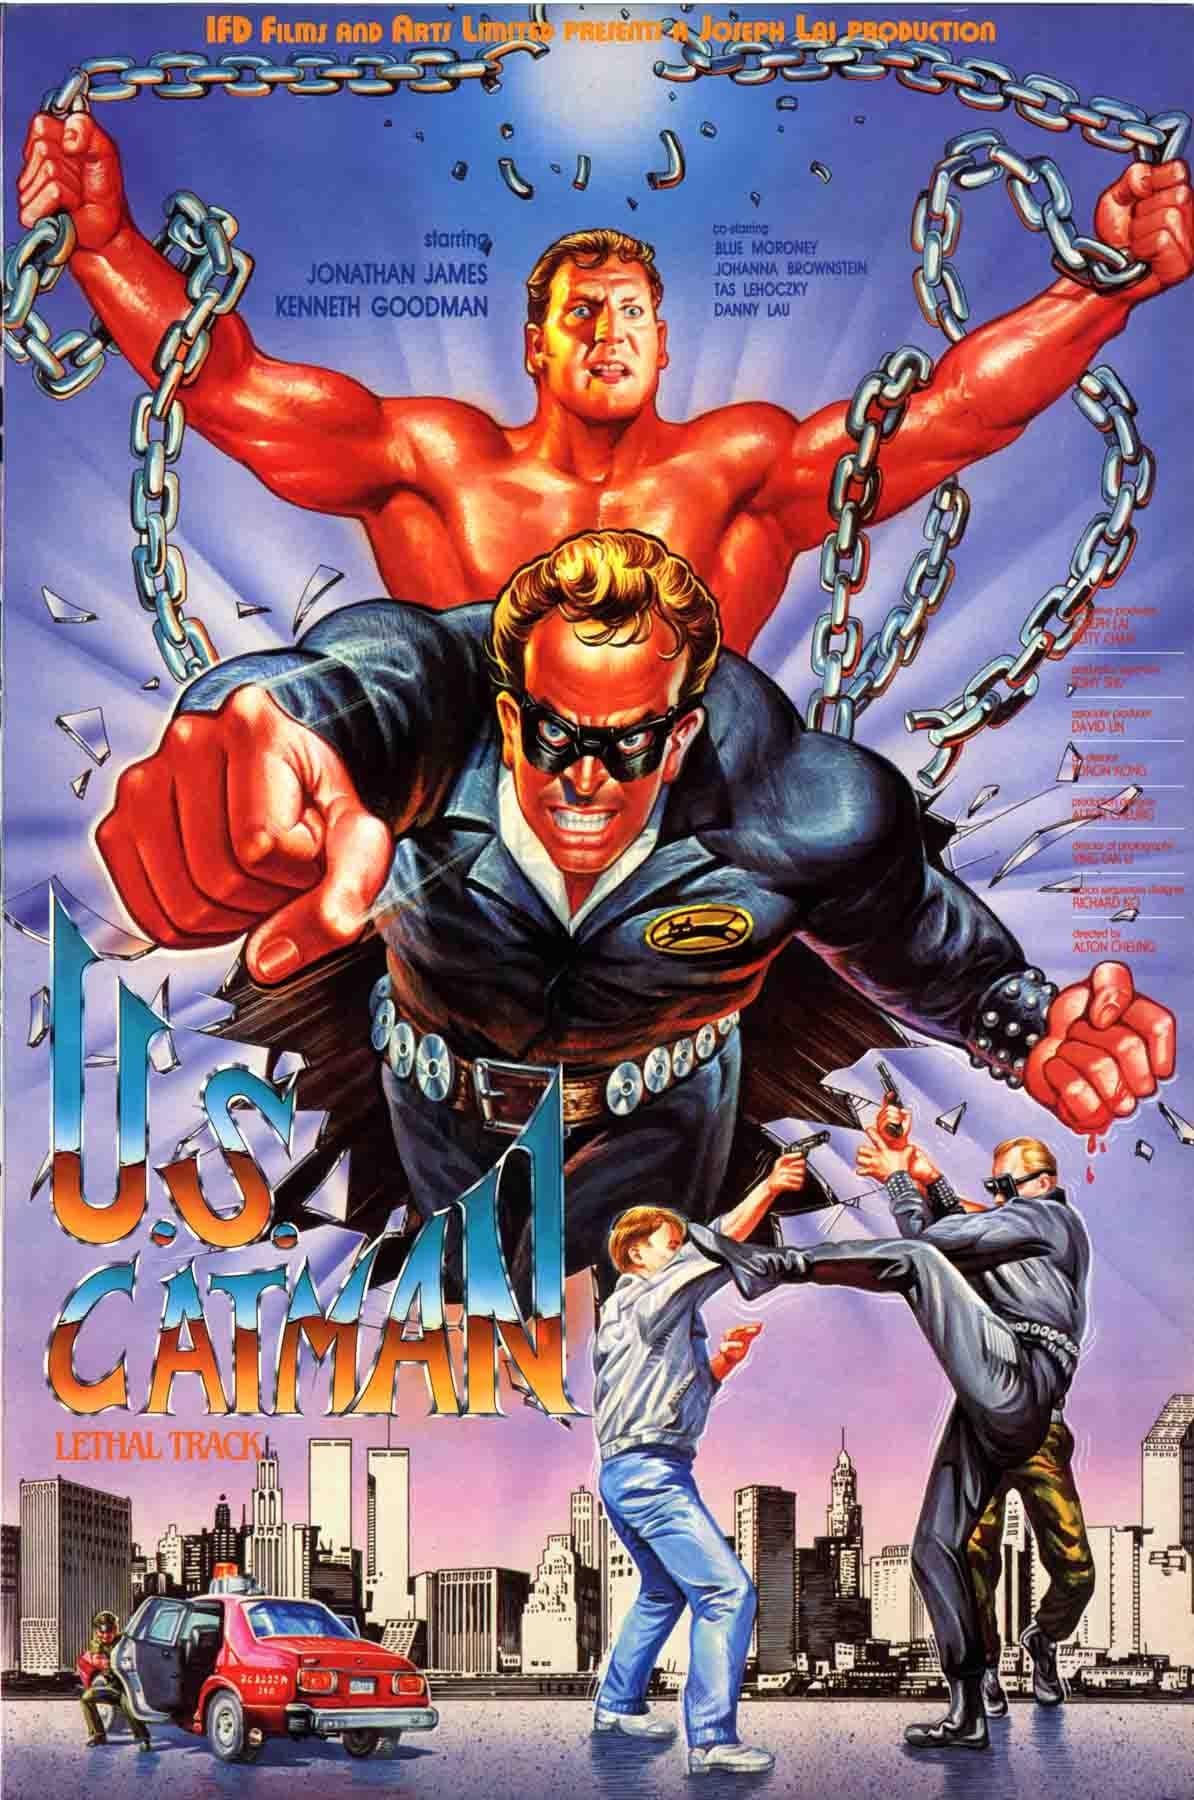 U.S. Catman: Lethal Track poster